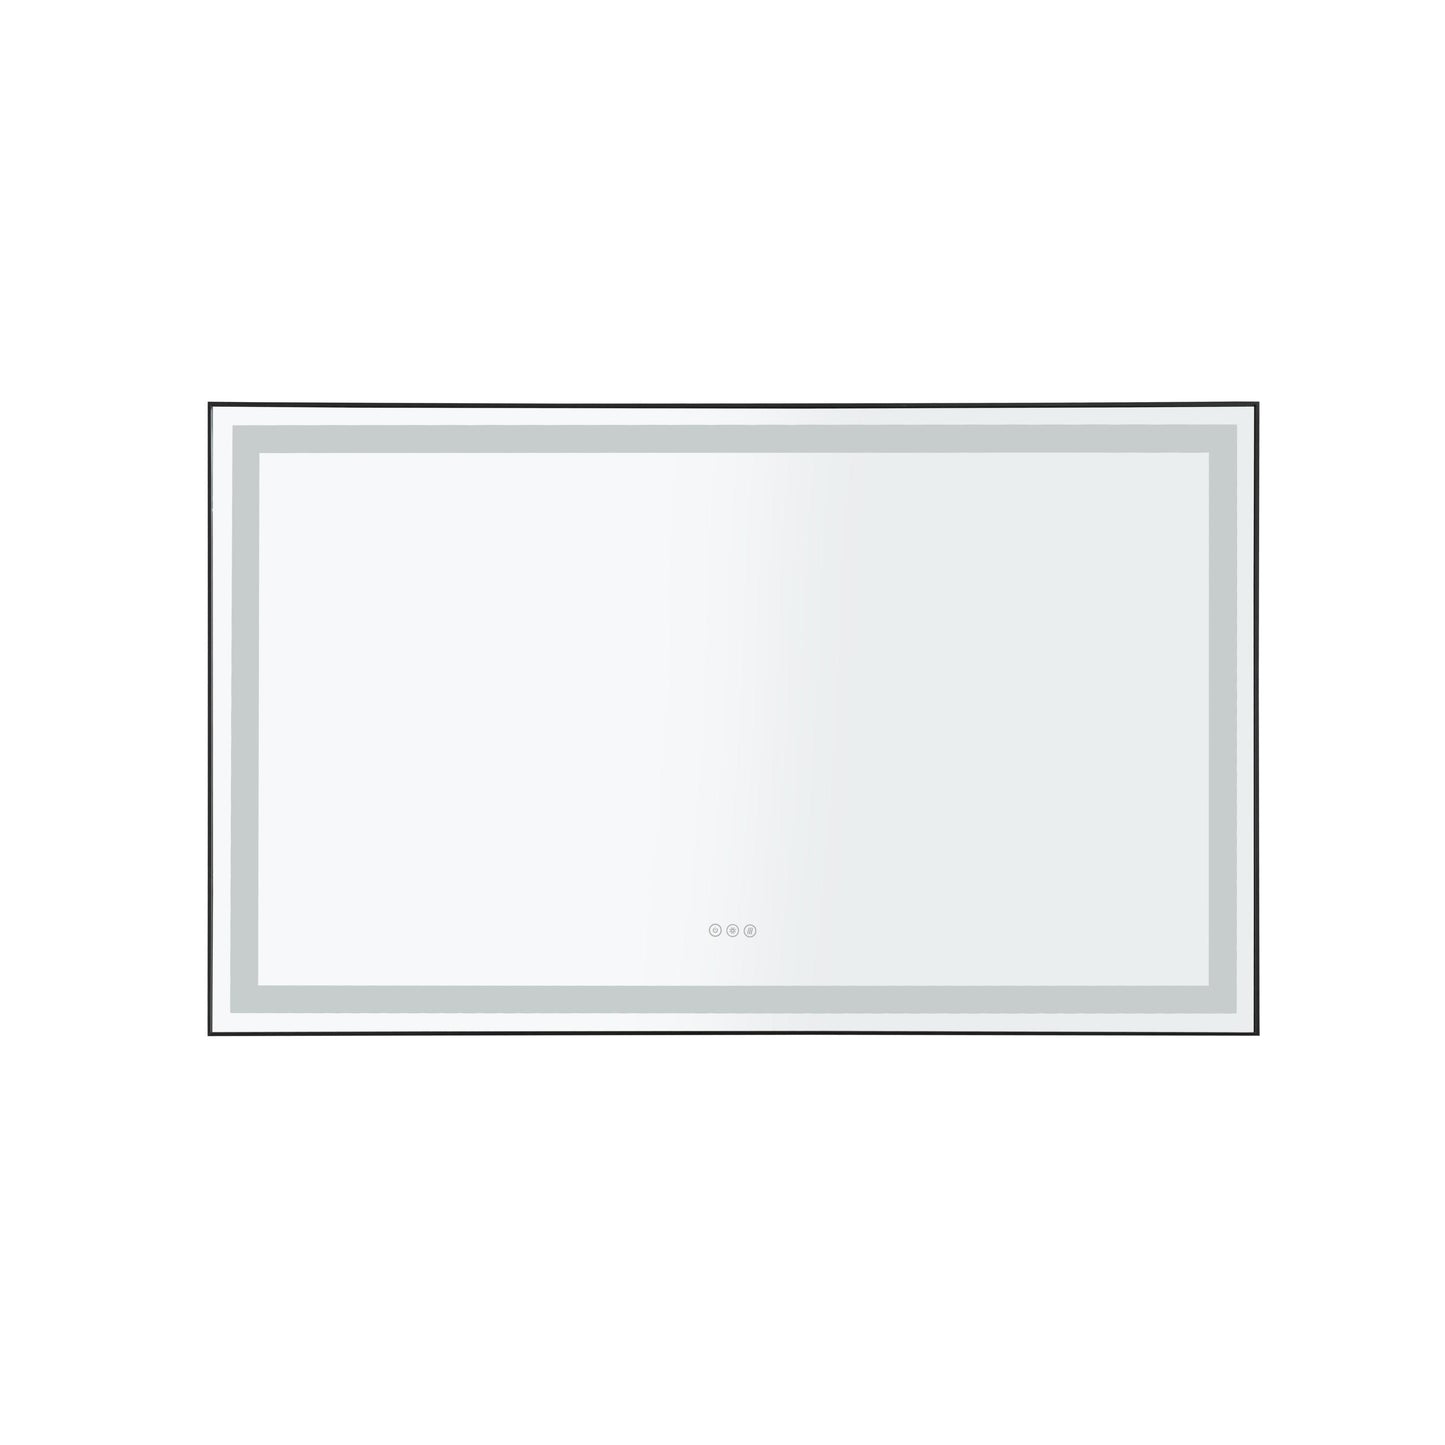 60in. W x 48 in. H Super Bright Led Bathroom Mirror with Lights, Metal Frame Mirror Wall Mounted Lighted Vanity Mirrors for Wall, 
Anti Fog Dimmable Led Mirror for Makeup, Horizontal/Verti